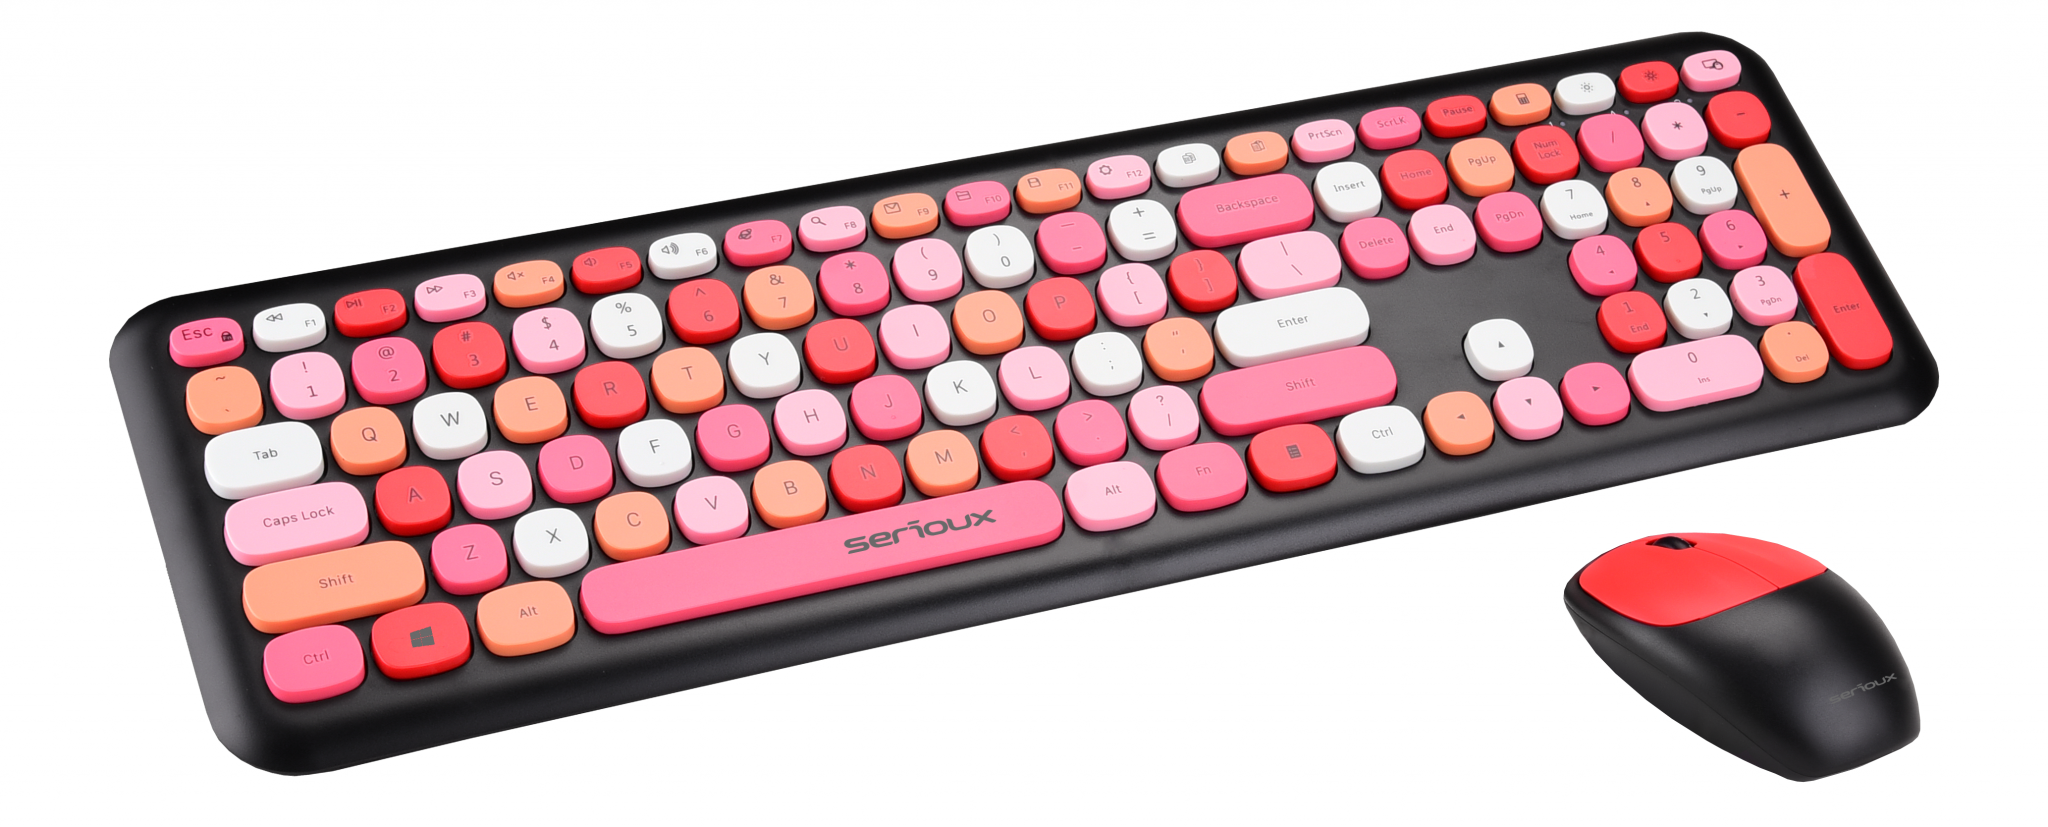 Kit tastatura + mouse Serioux Colourful 9920RD, wireless 2.4GHz, US